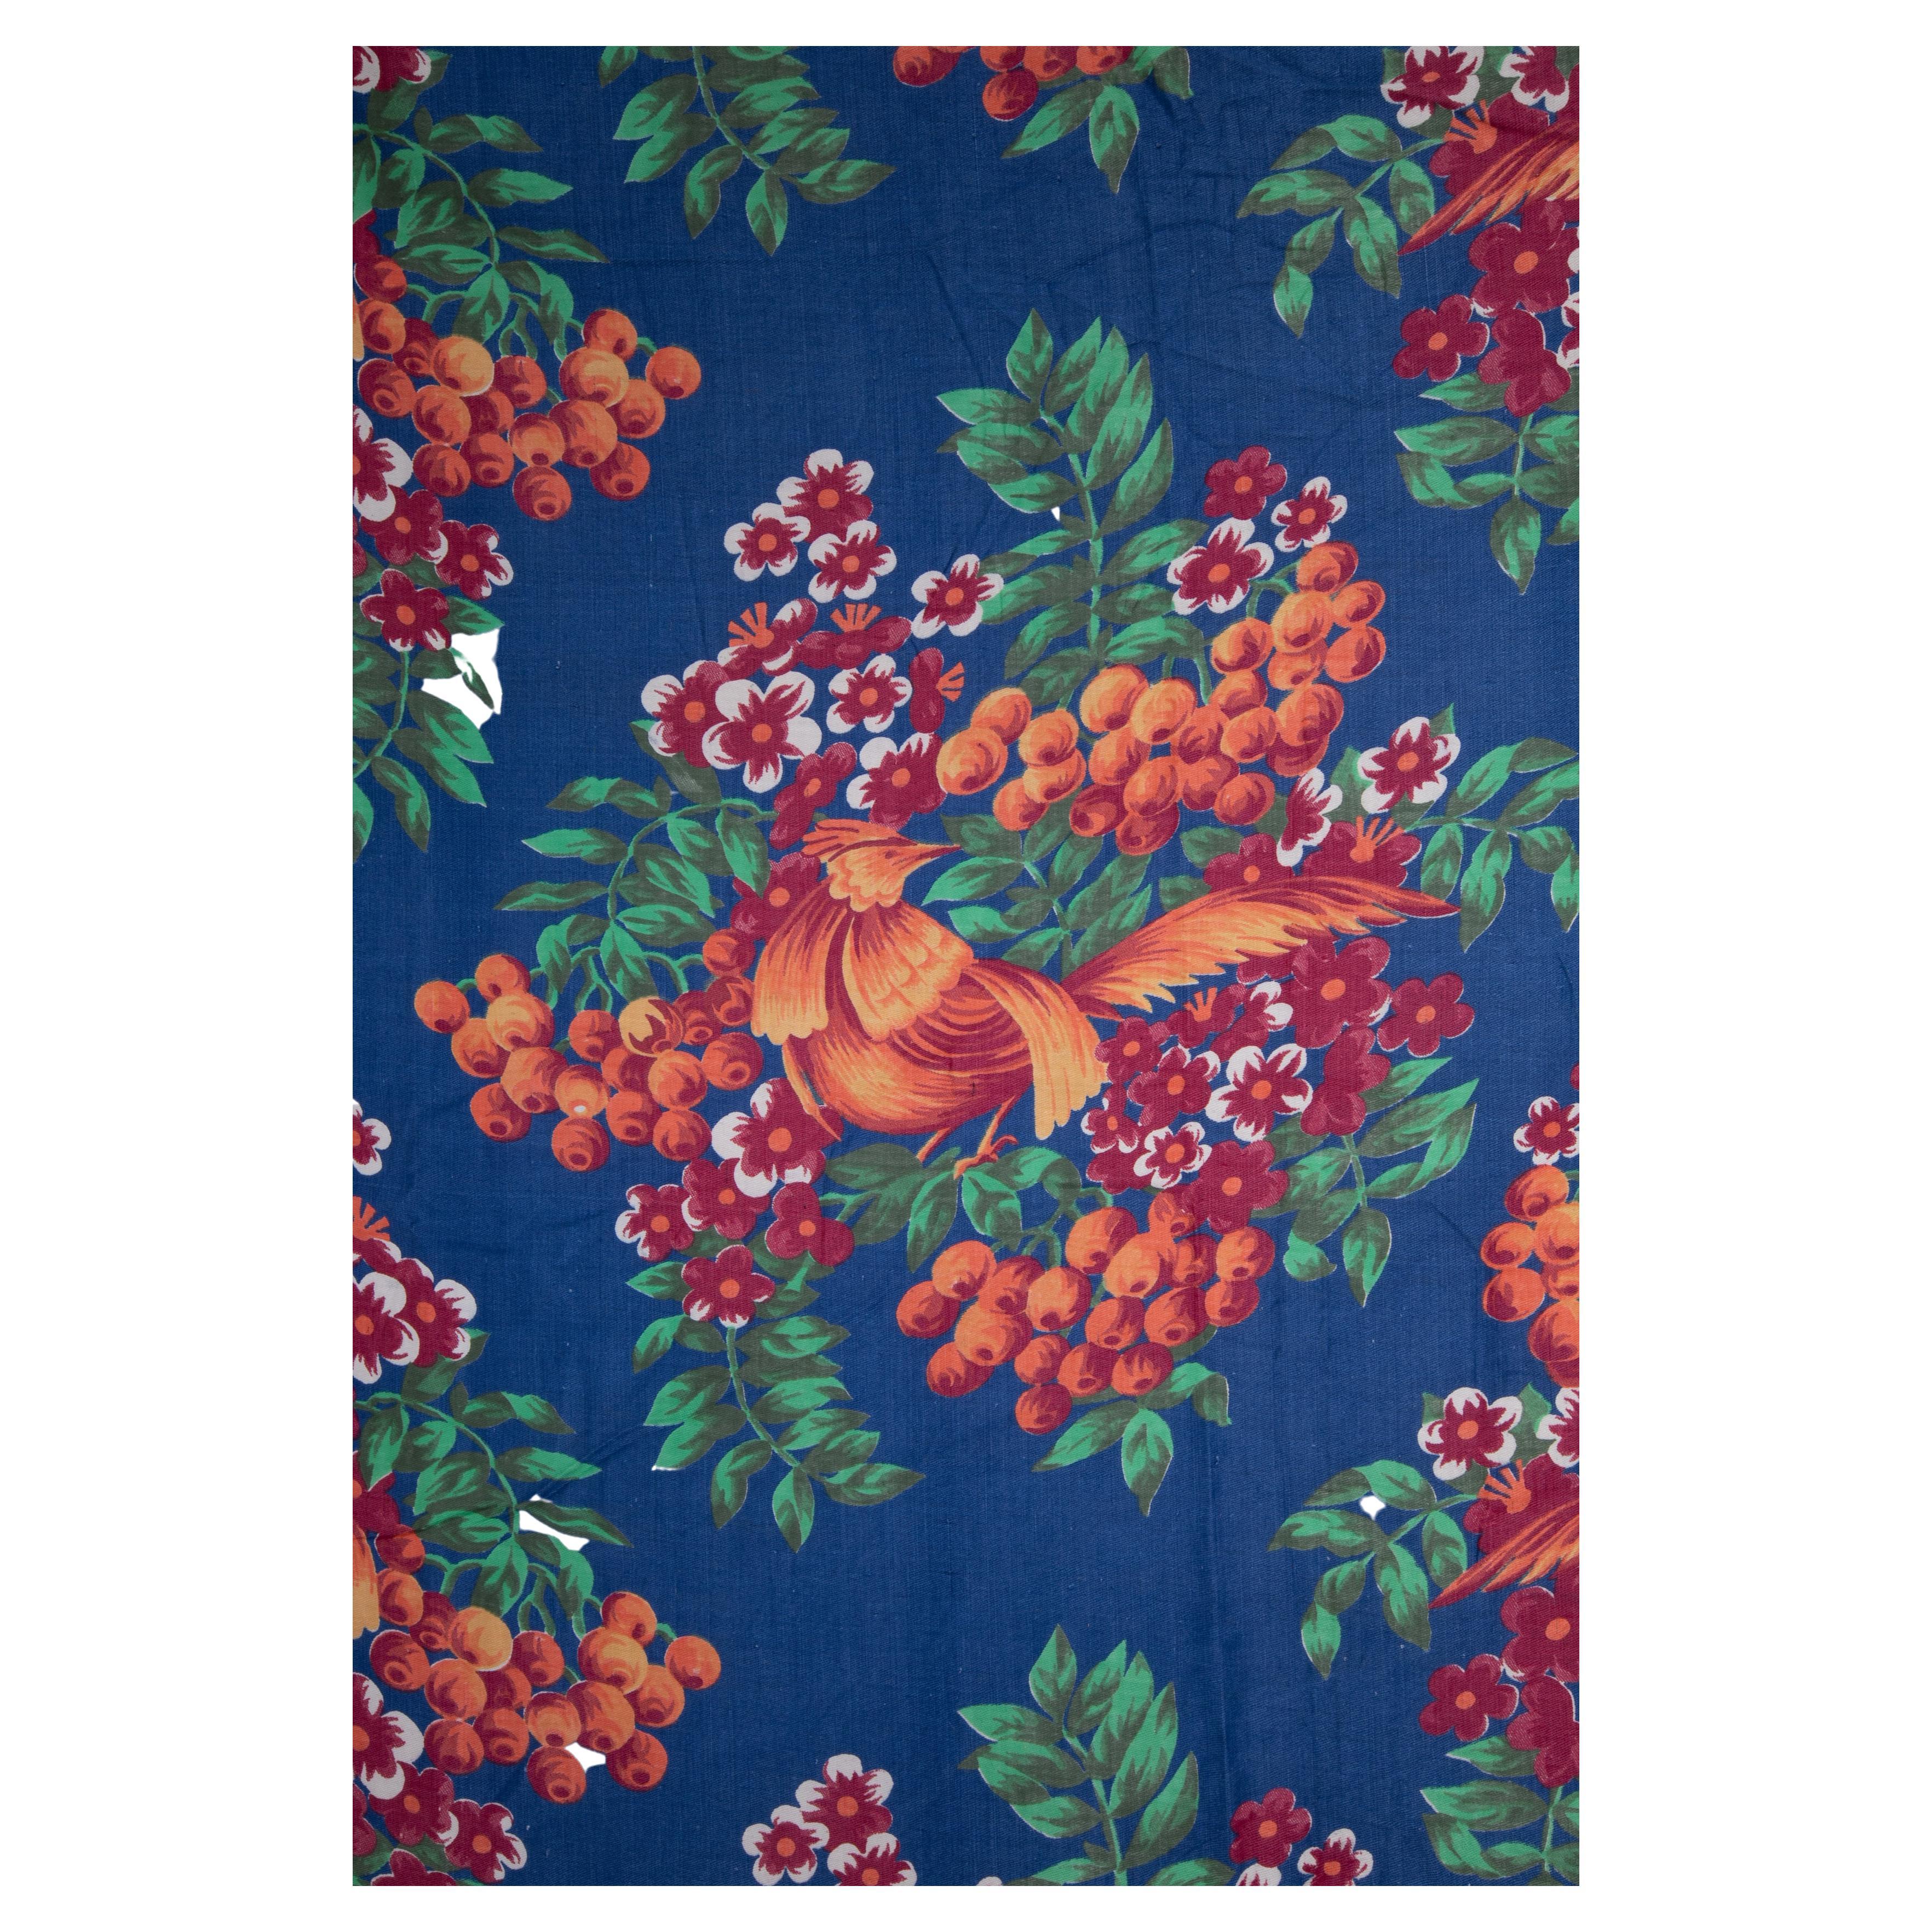 Russian Roller Printed Cotton Fabric Panel, Mid-20th Century or Earlier For Sale